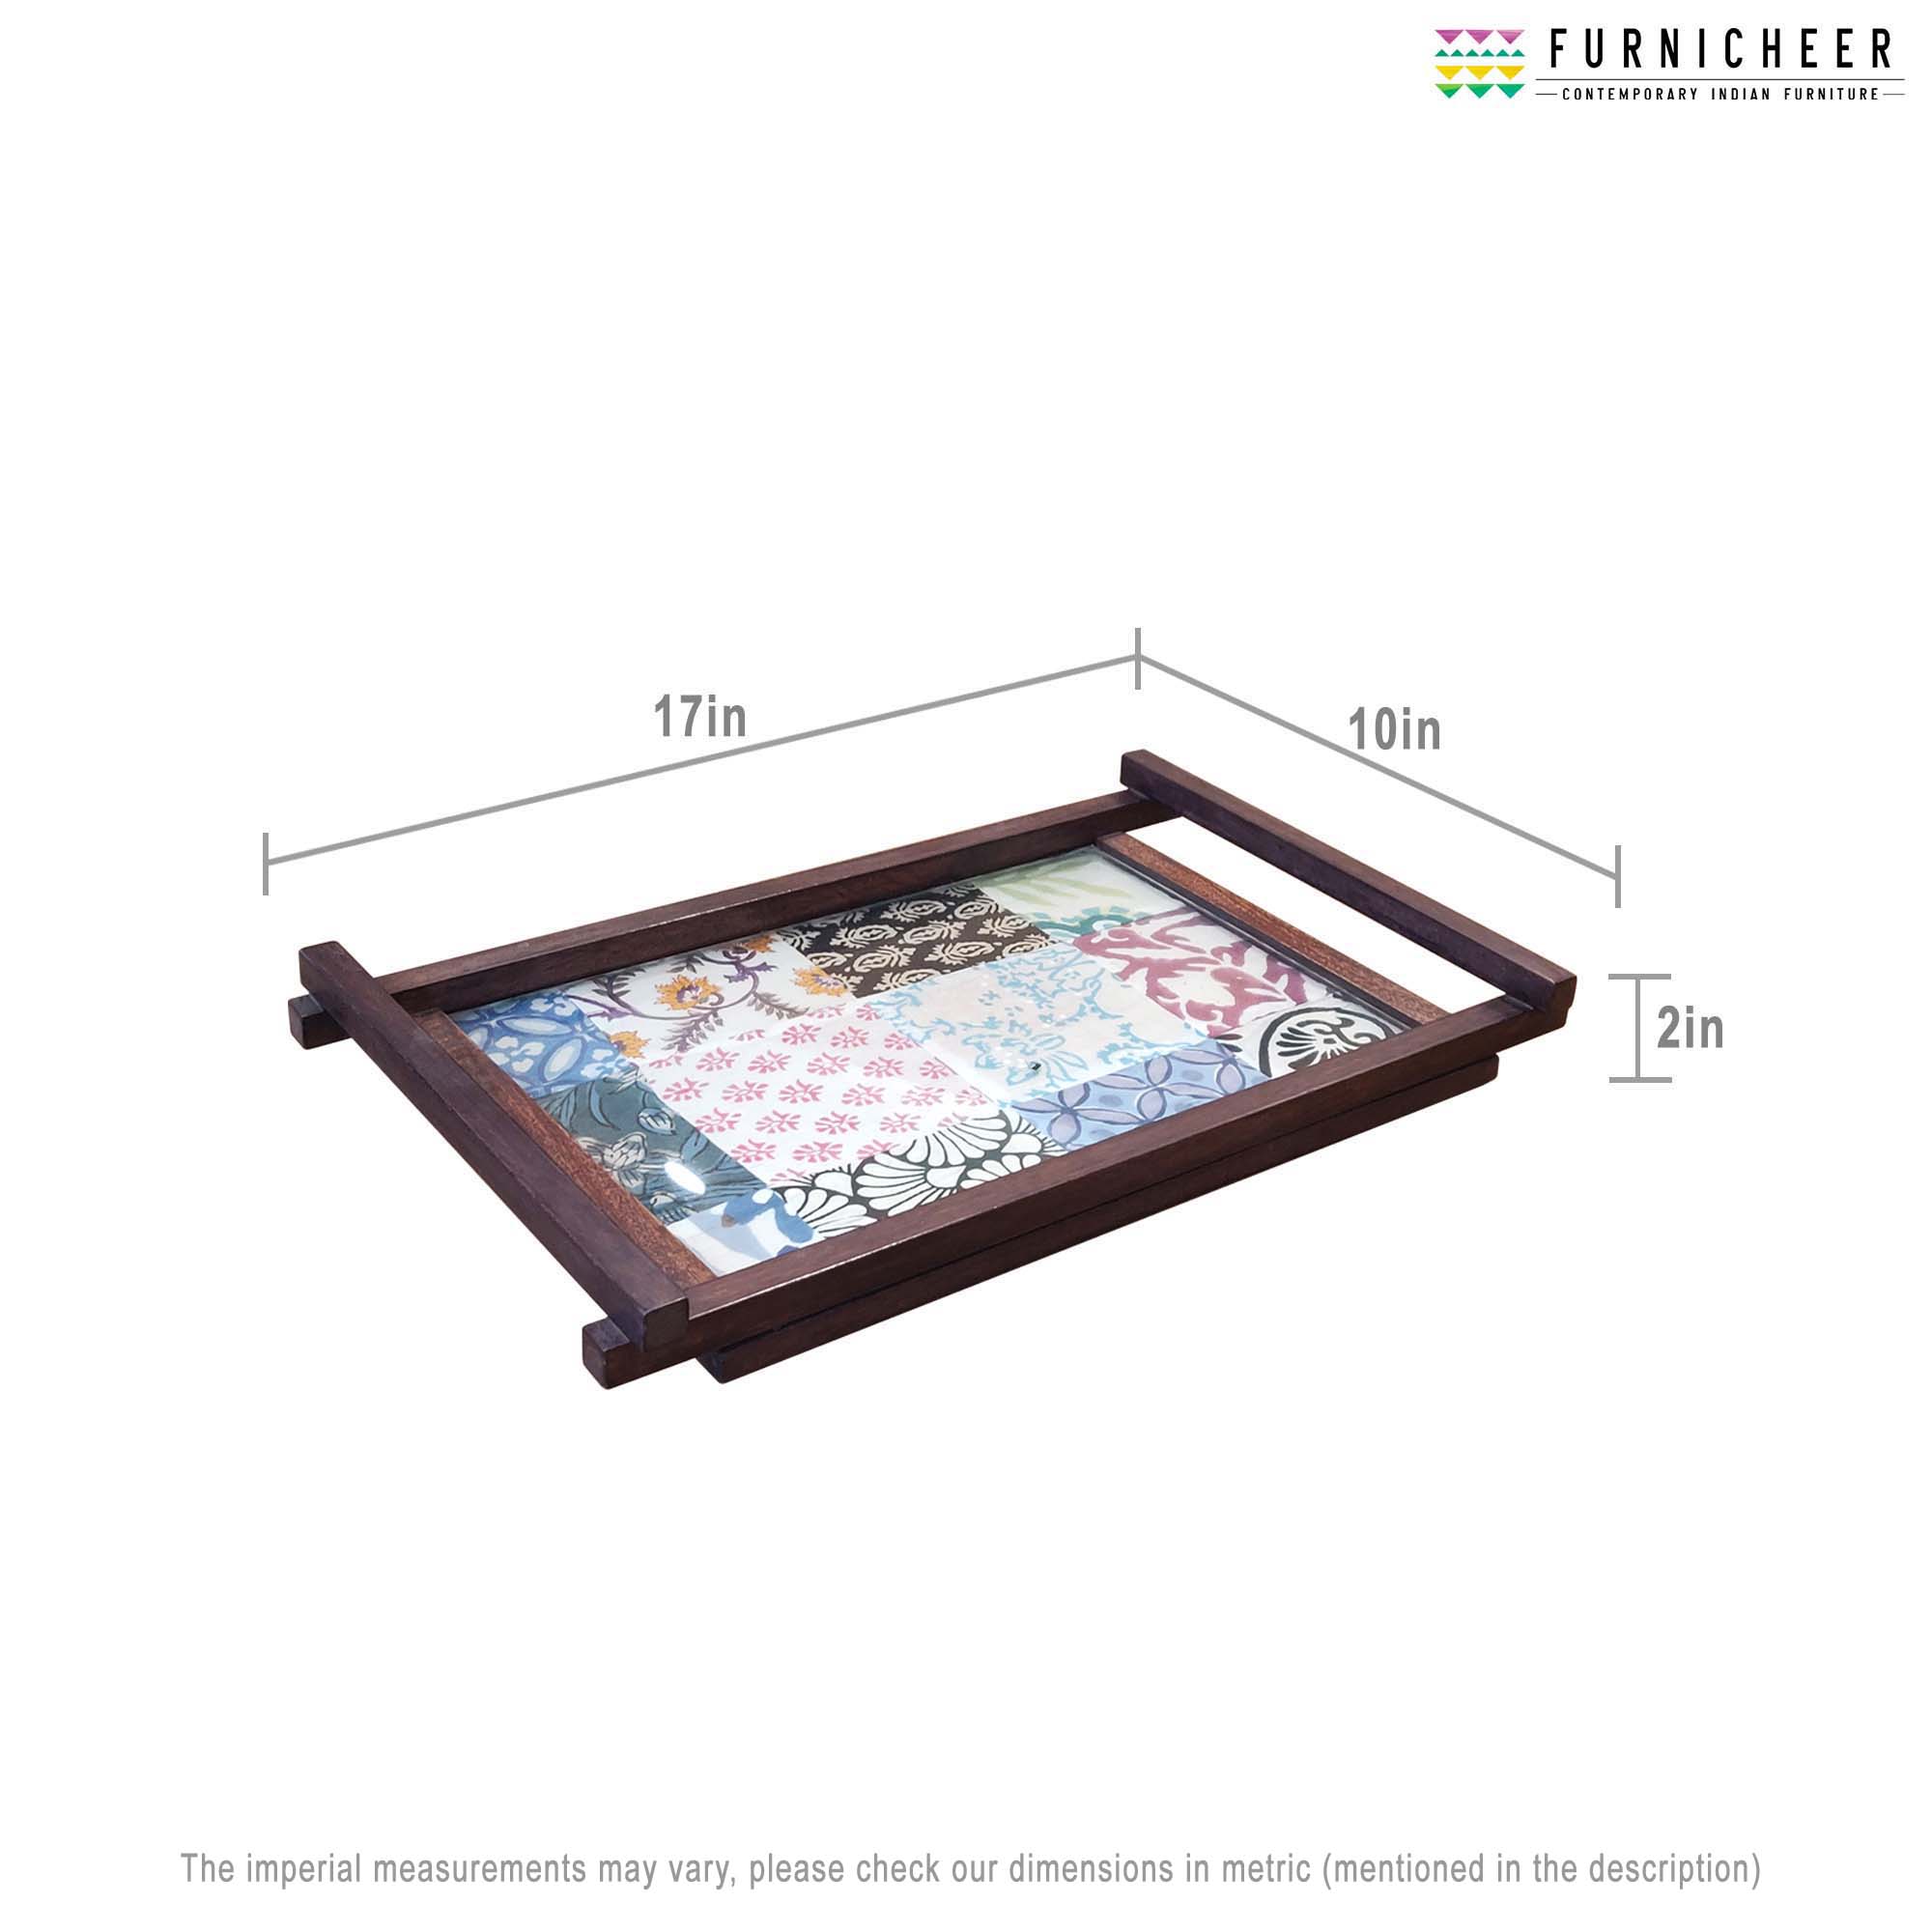 SERVING TRAY 10 X 17